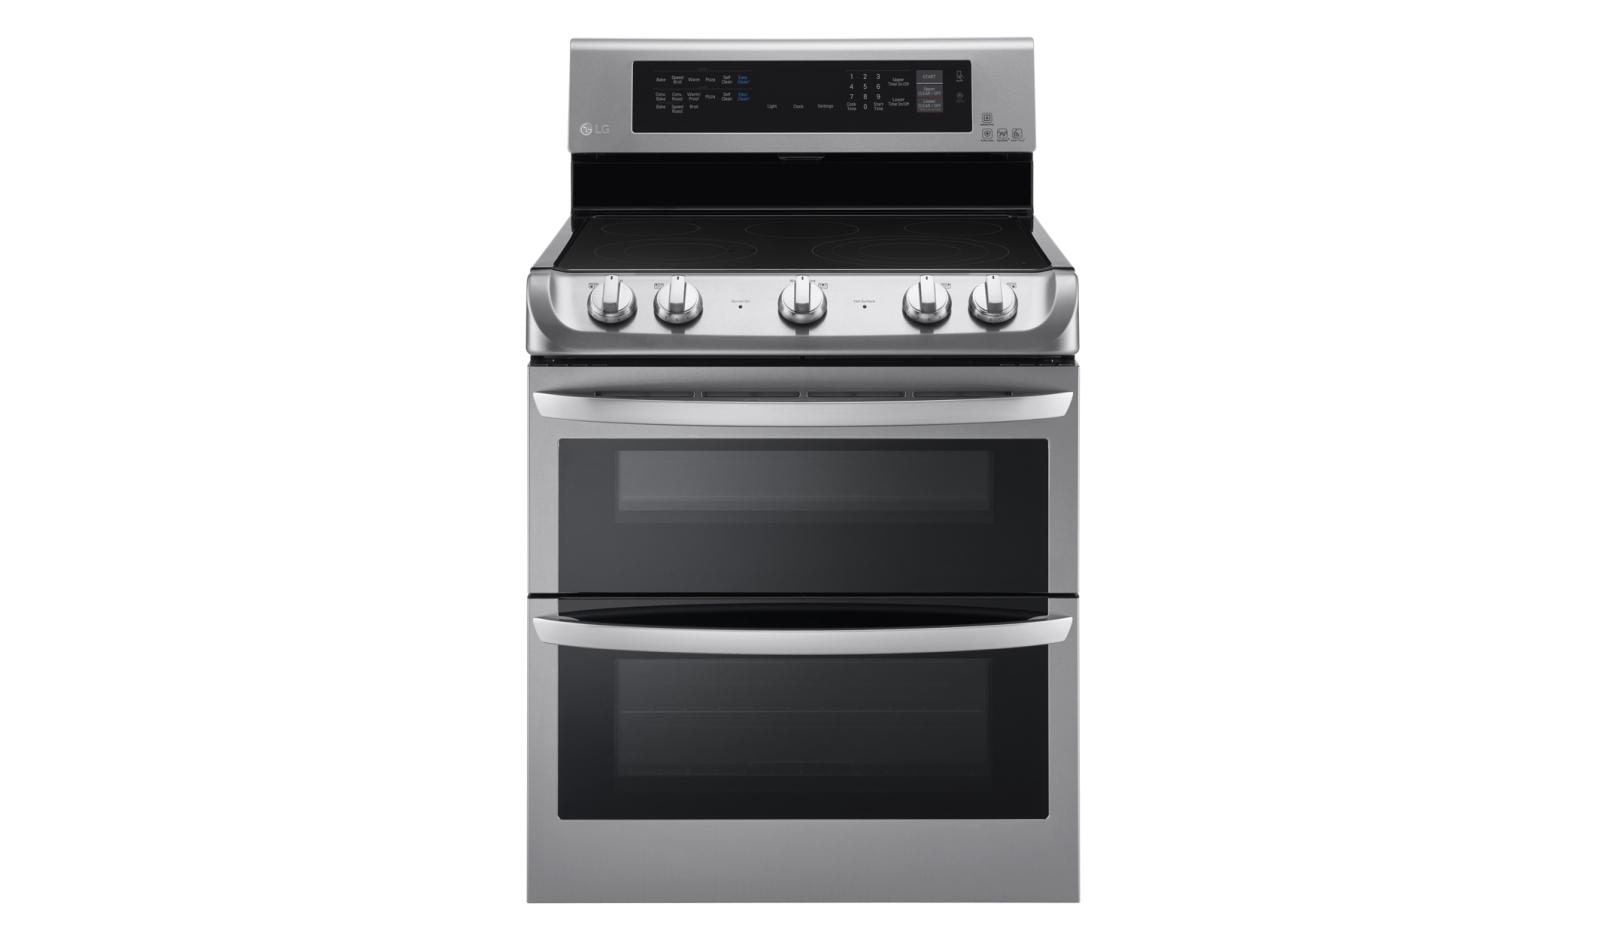 Lg 7.3 cu. ft. Electric Double Oven Range with ProBake Convection® and EasyClean®